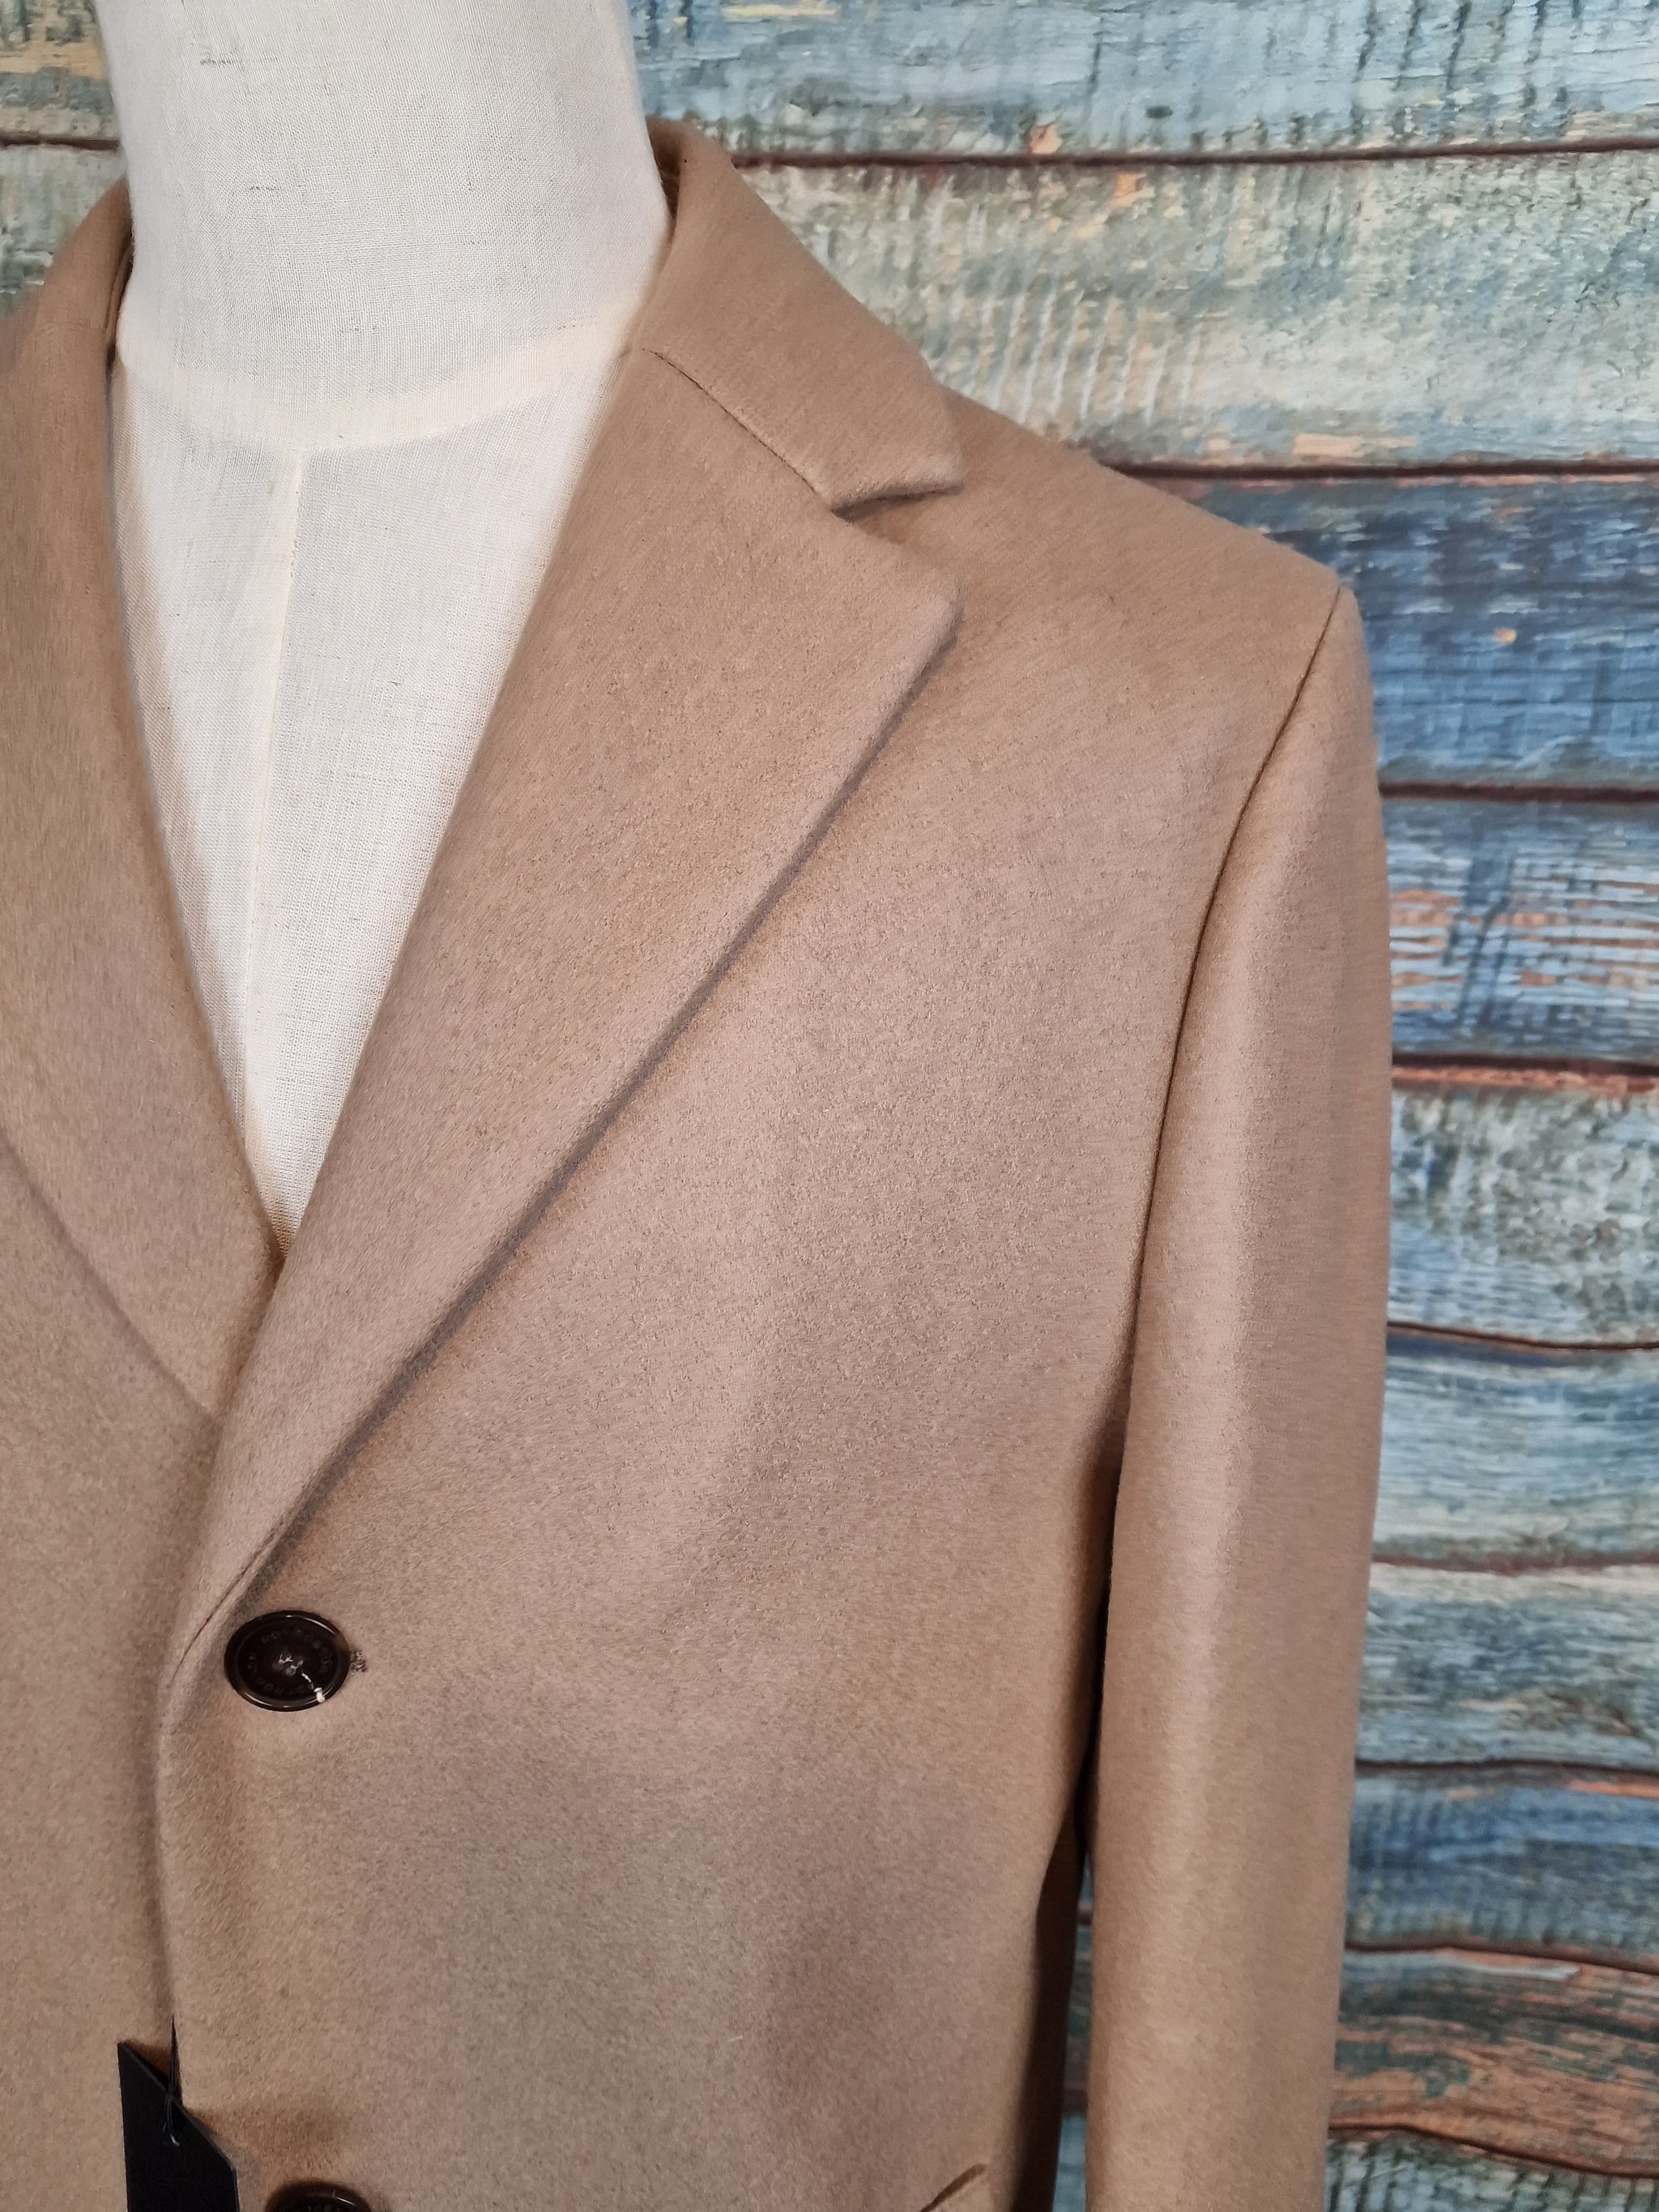 ROY ROBSON Wool and Cashmere overcoats